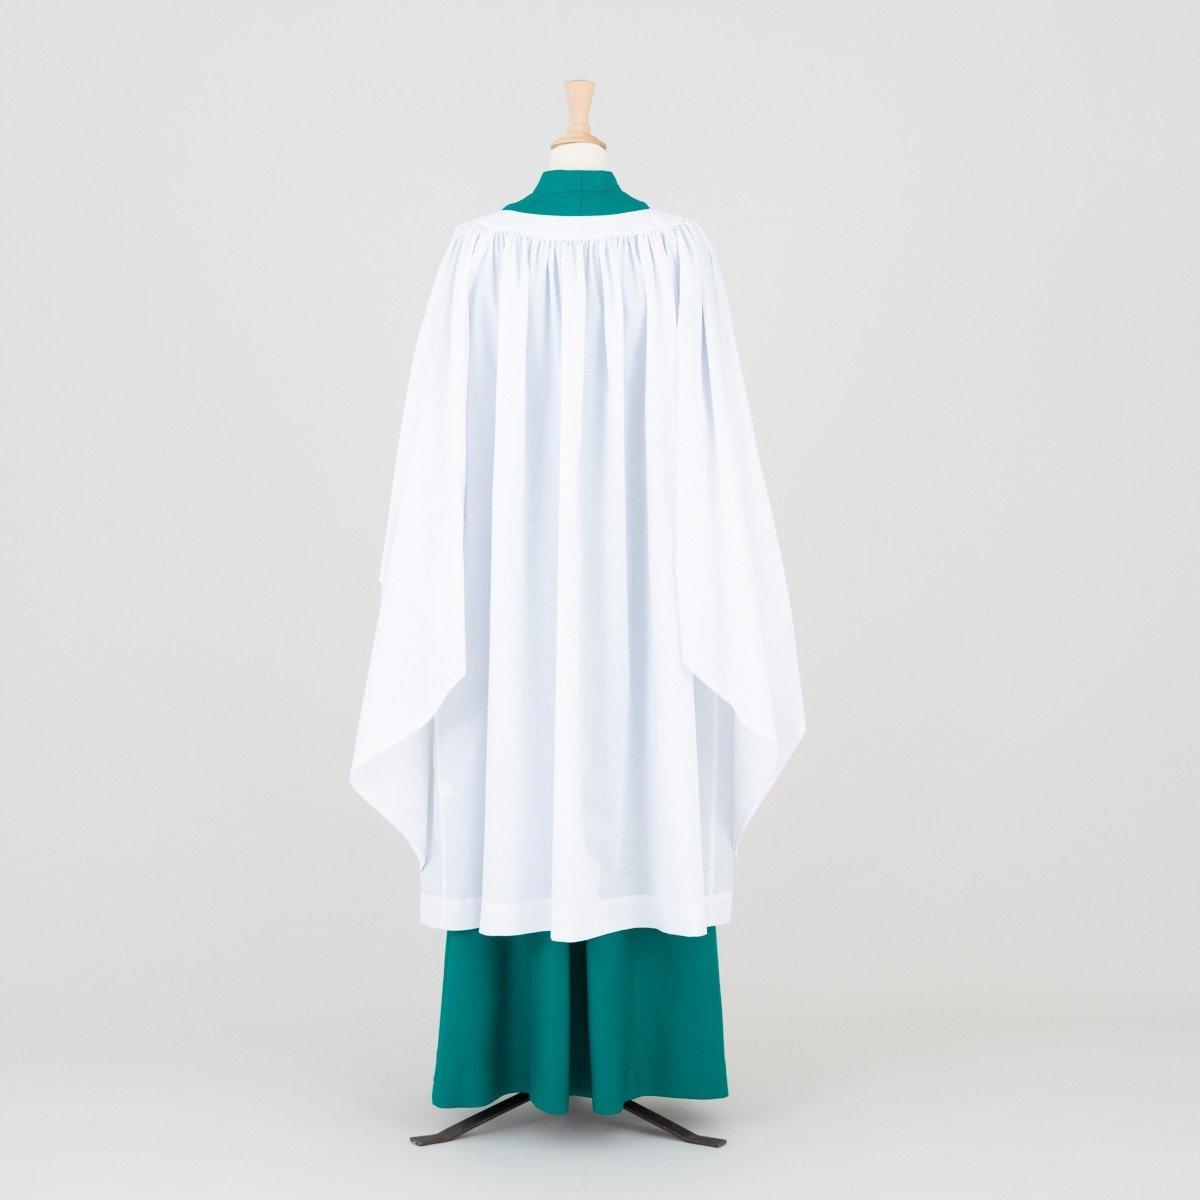 Adult's Cathedral Surplice - Watts & Co. (international)